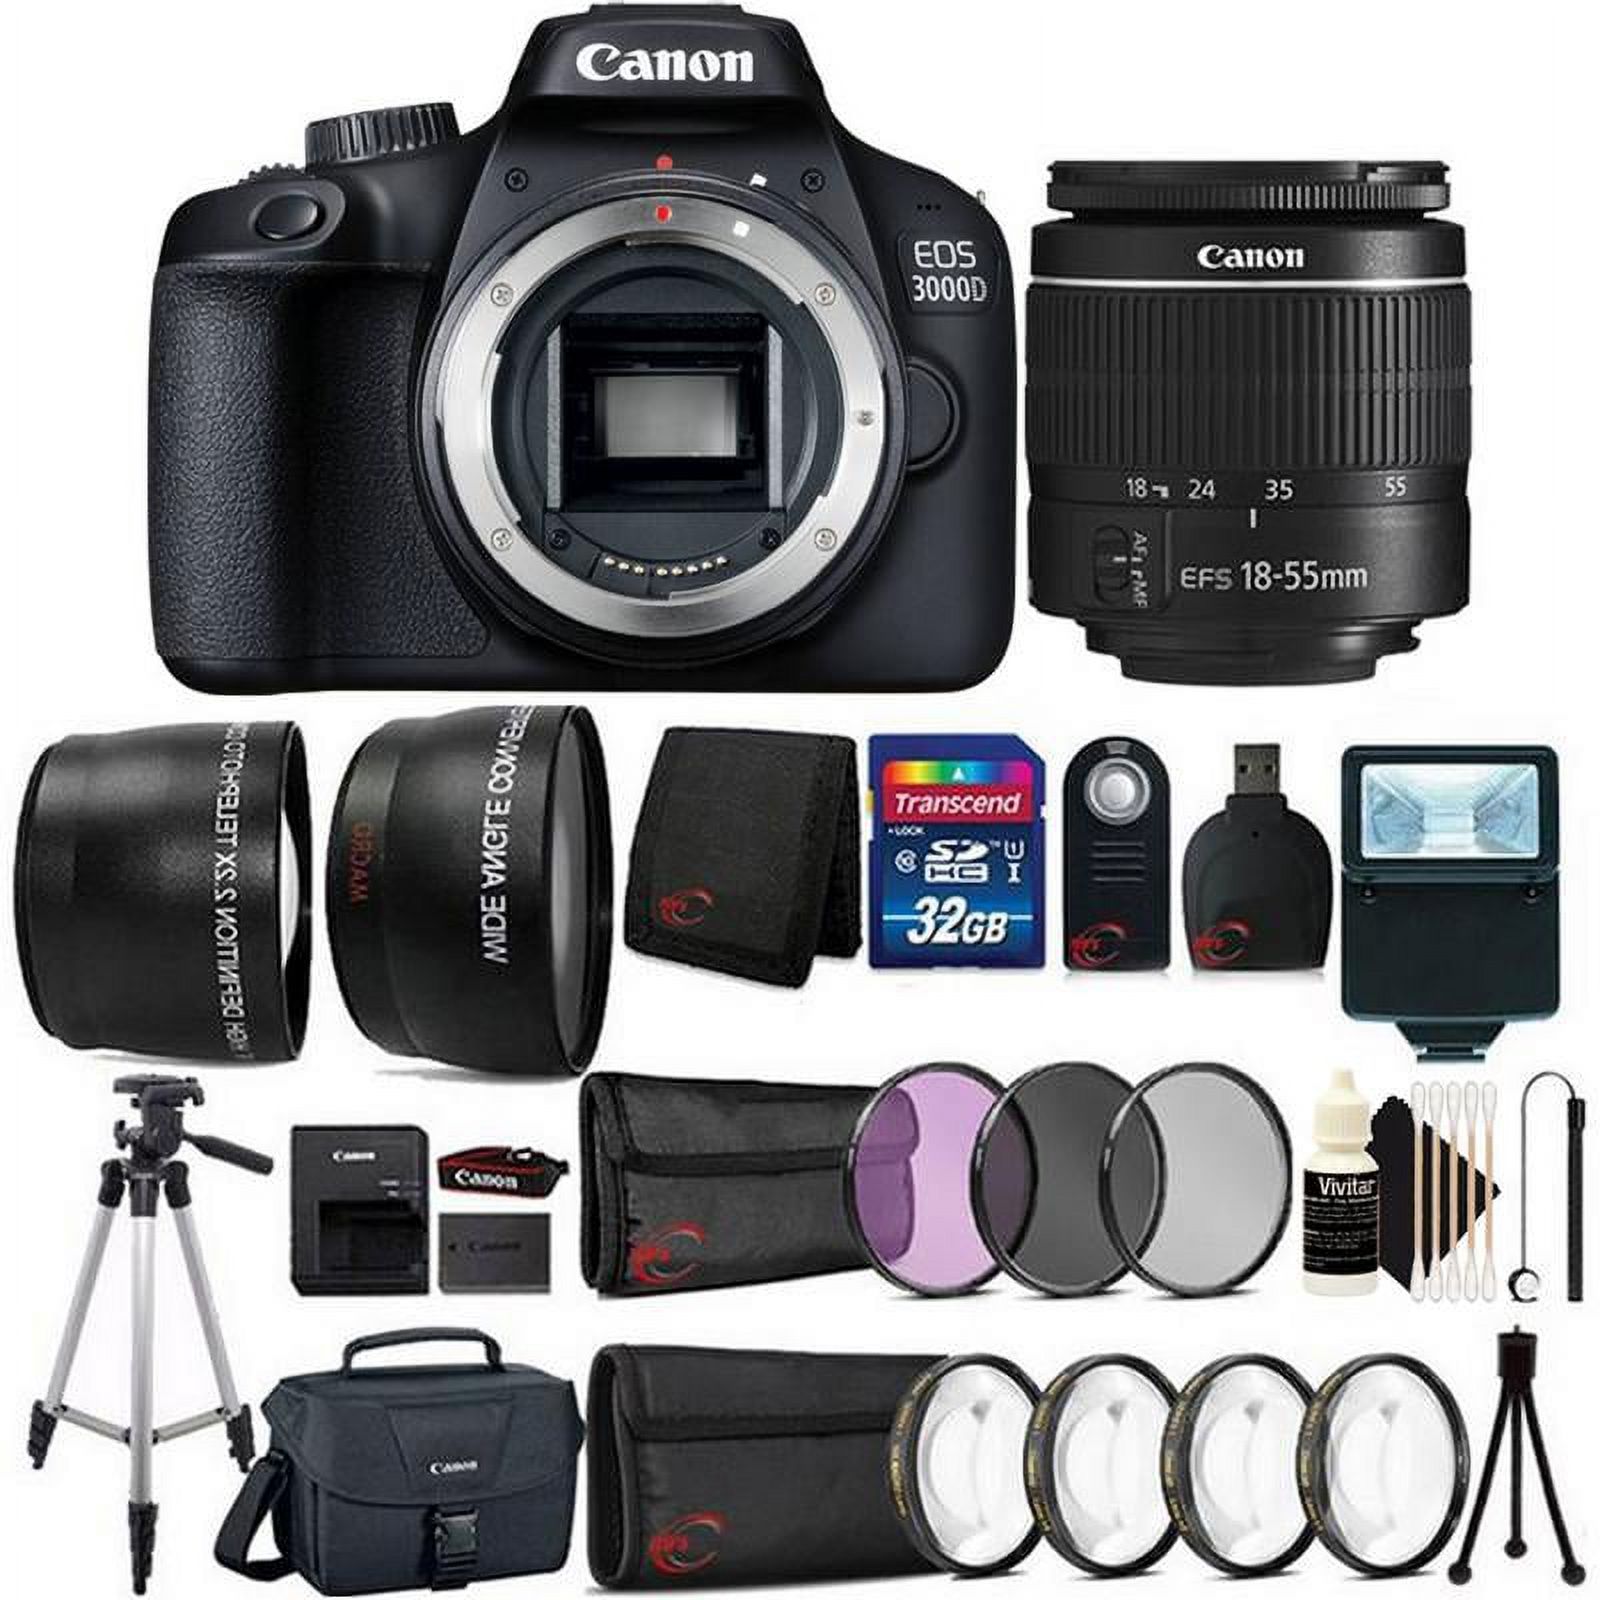 Canon EOS 3000D / Rebel T100 SLR Camera w/ 18-55mm Lens and 32GB Best Value Kit - image 1 of 11